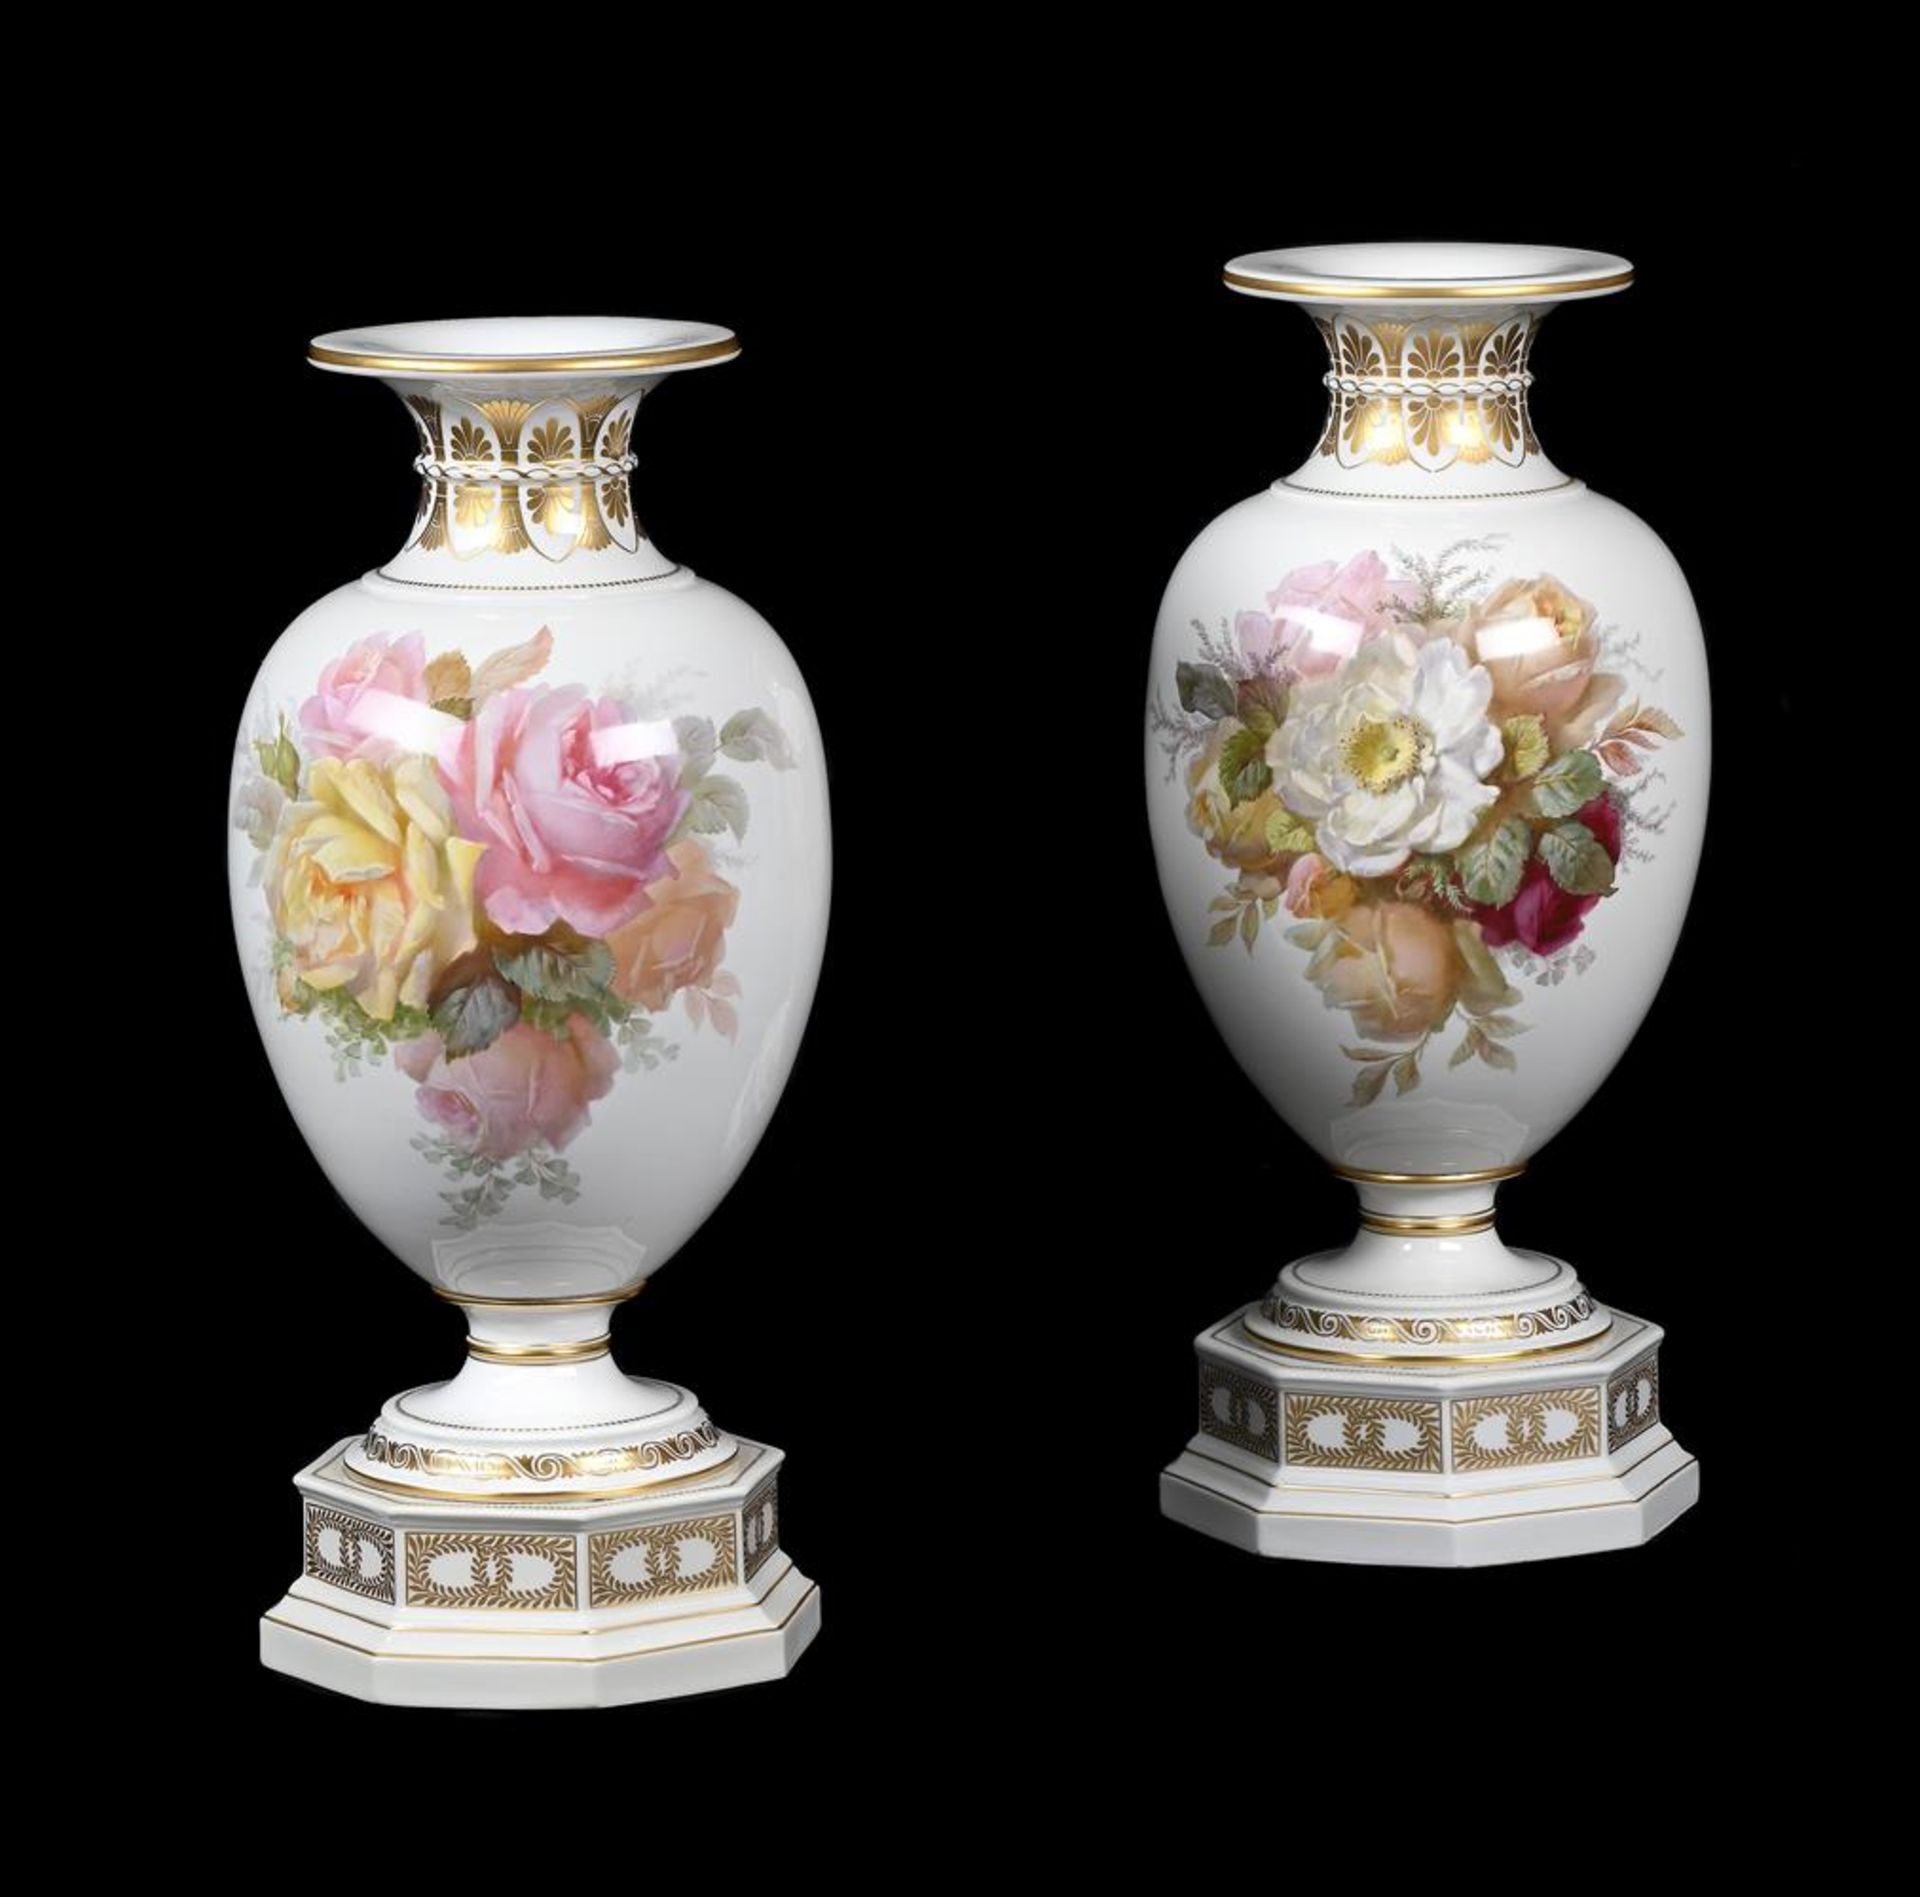 A VERY NEAR PAIR OF BERLIN (KPM) PORCELAIN VASES, CIRCA 1900 - Image 2 of 6